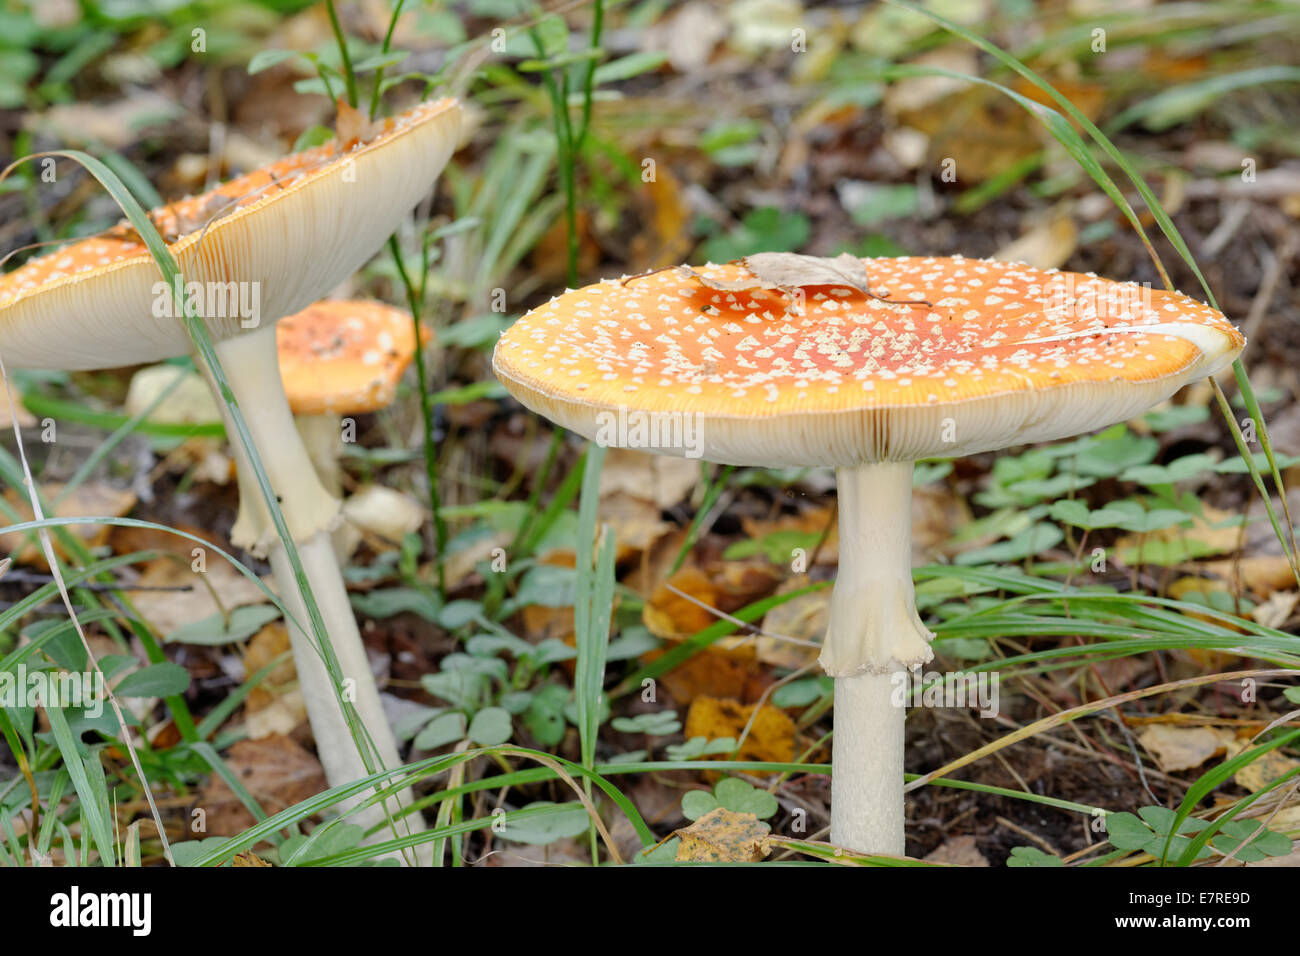 Amanita muscaria, commonly known as the fly agaric or fly amanita, is a poisonous and psychoactive basidiomycete fungus. Stock Photo